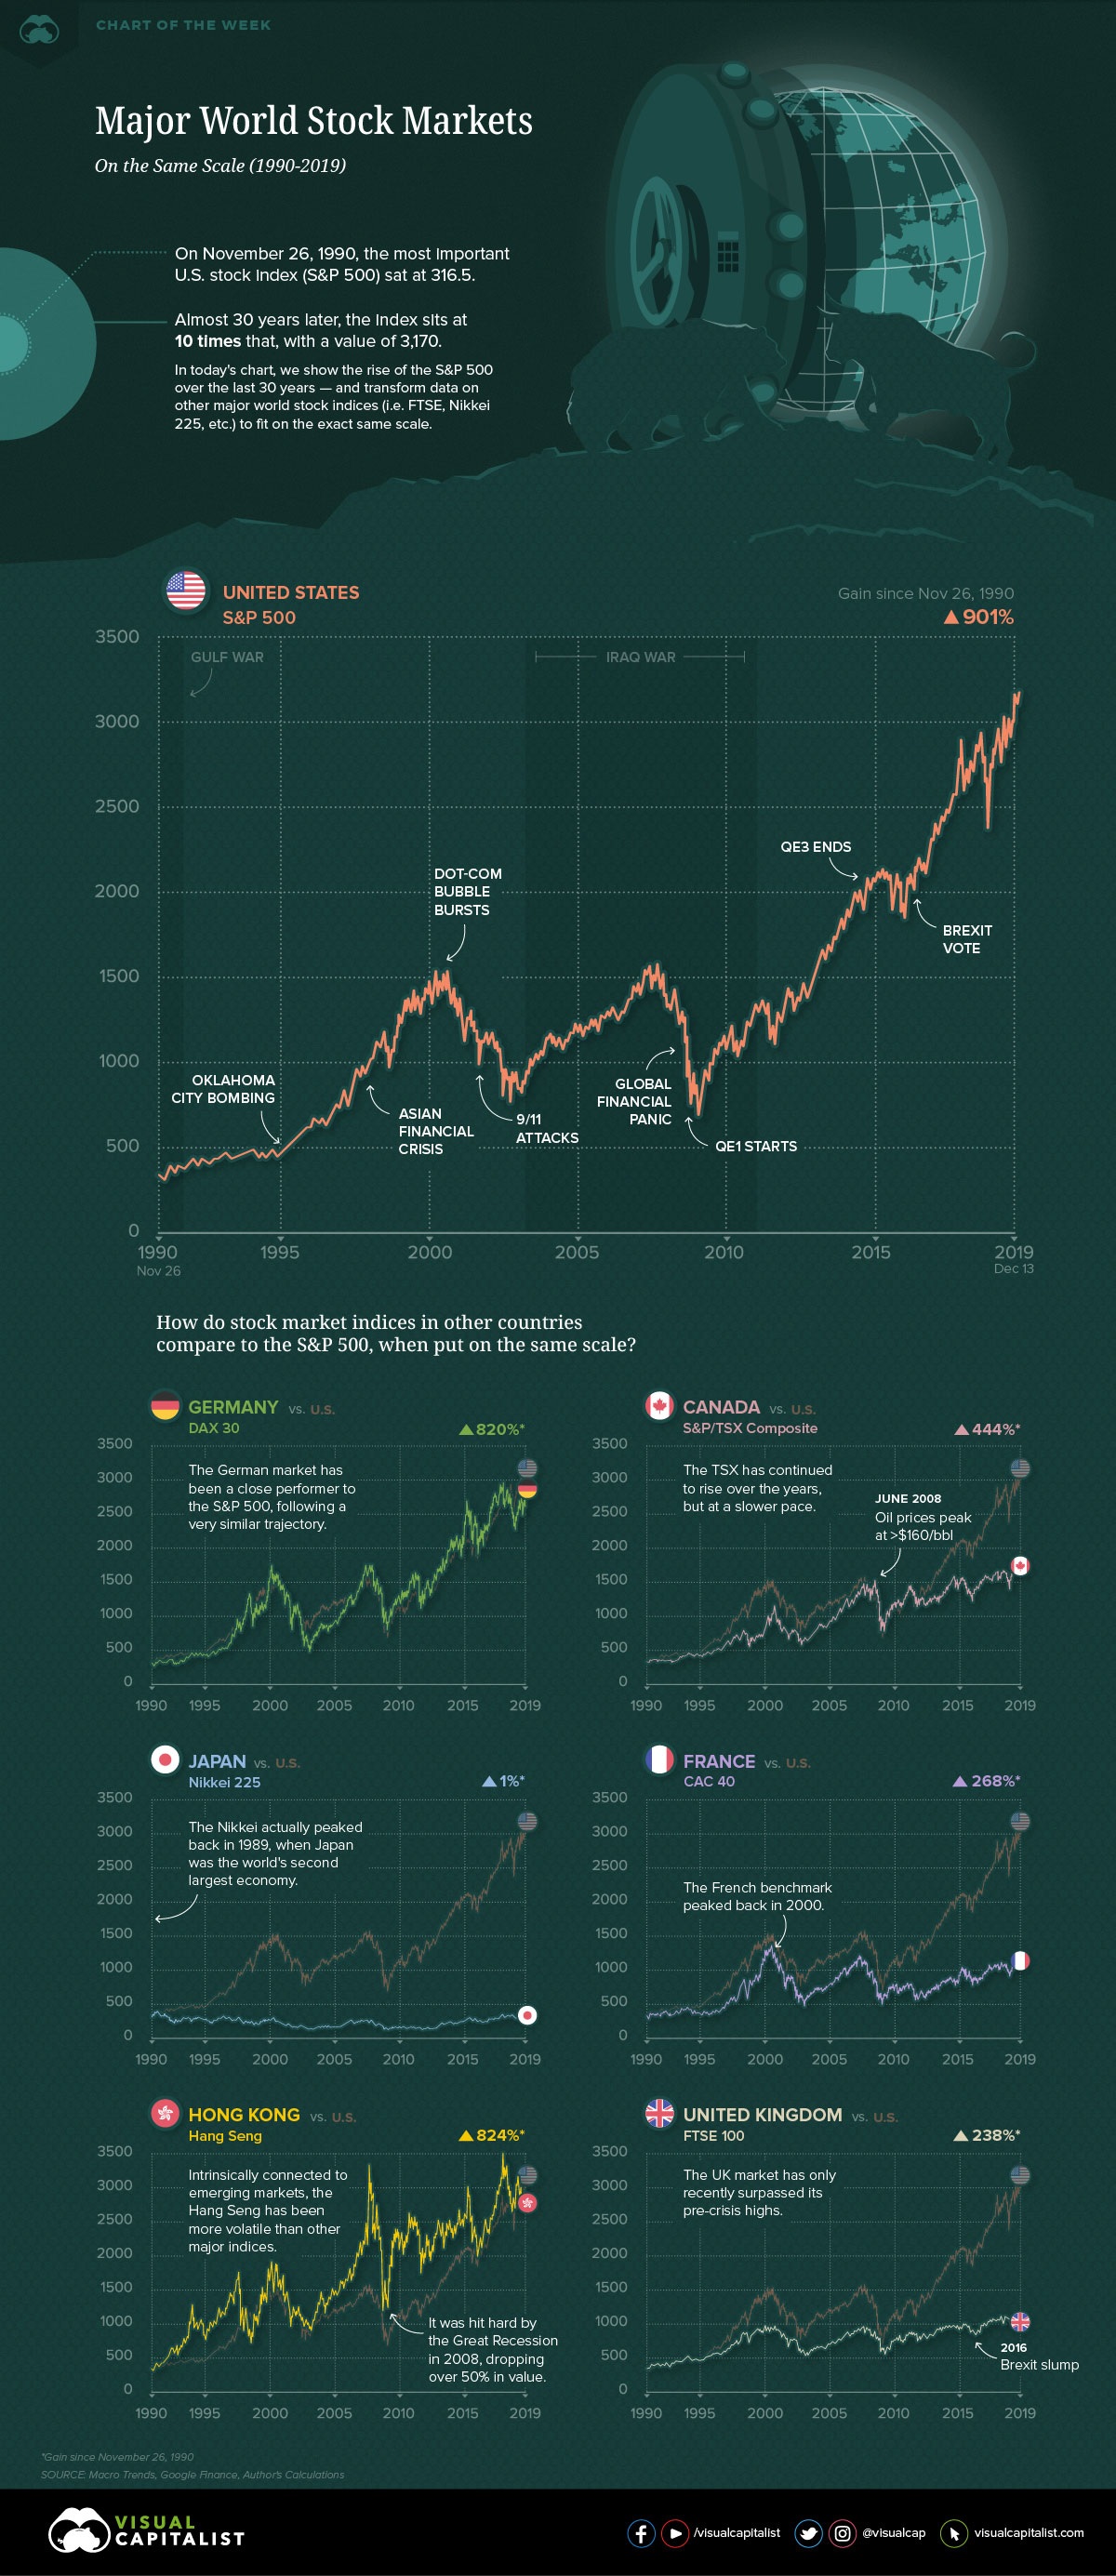 Visual Capitalist - Charting the World’s Major Stock Markets on the Same Scale 1990-2019